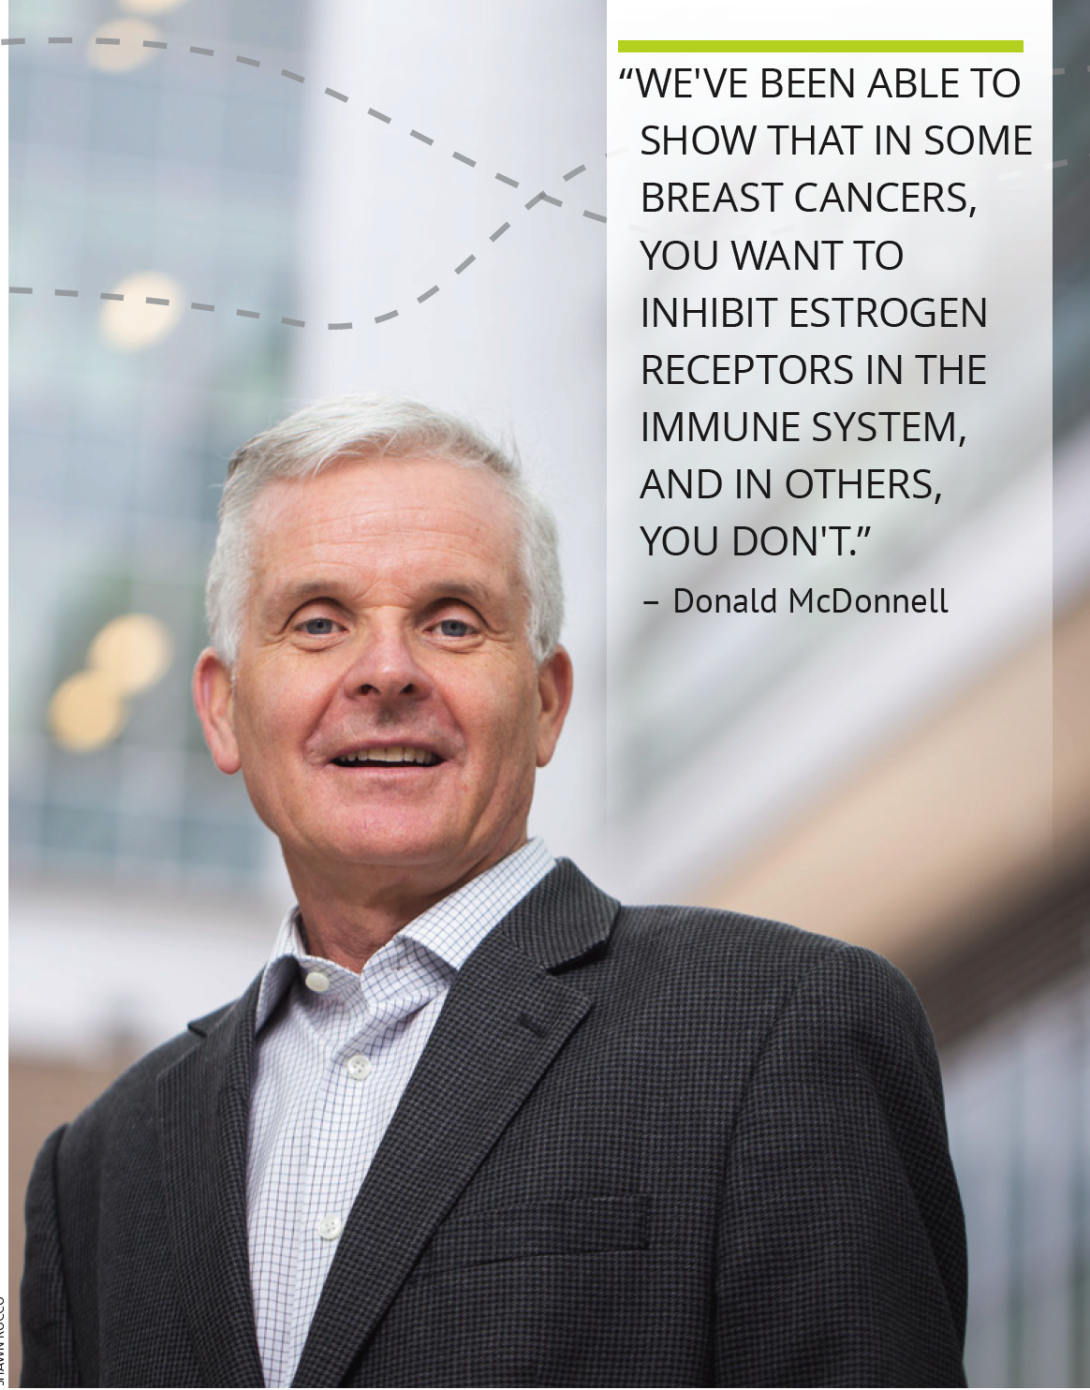 Donald McDonell smiles with a quote beside his head that reads "We've been able to show that in some breast cancers, you want to inhibit estrogen receptors in the immune system, and in others, you don't."